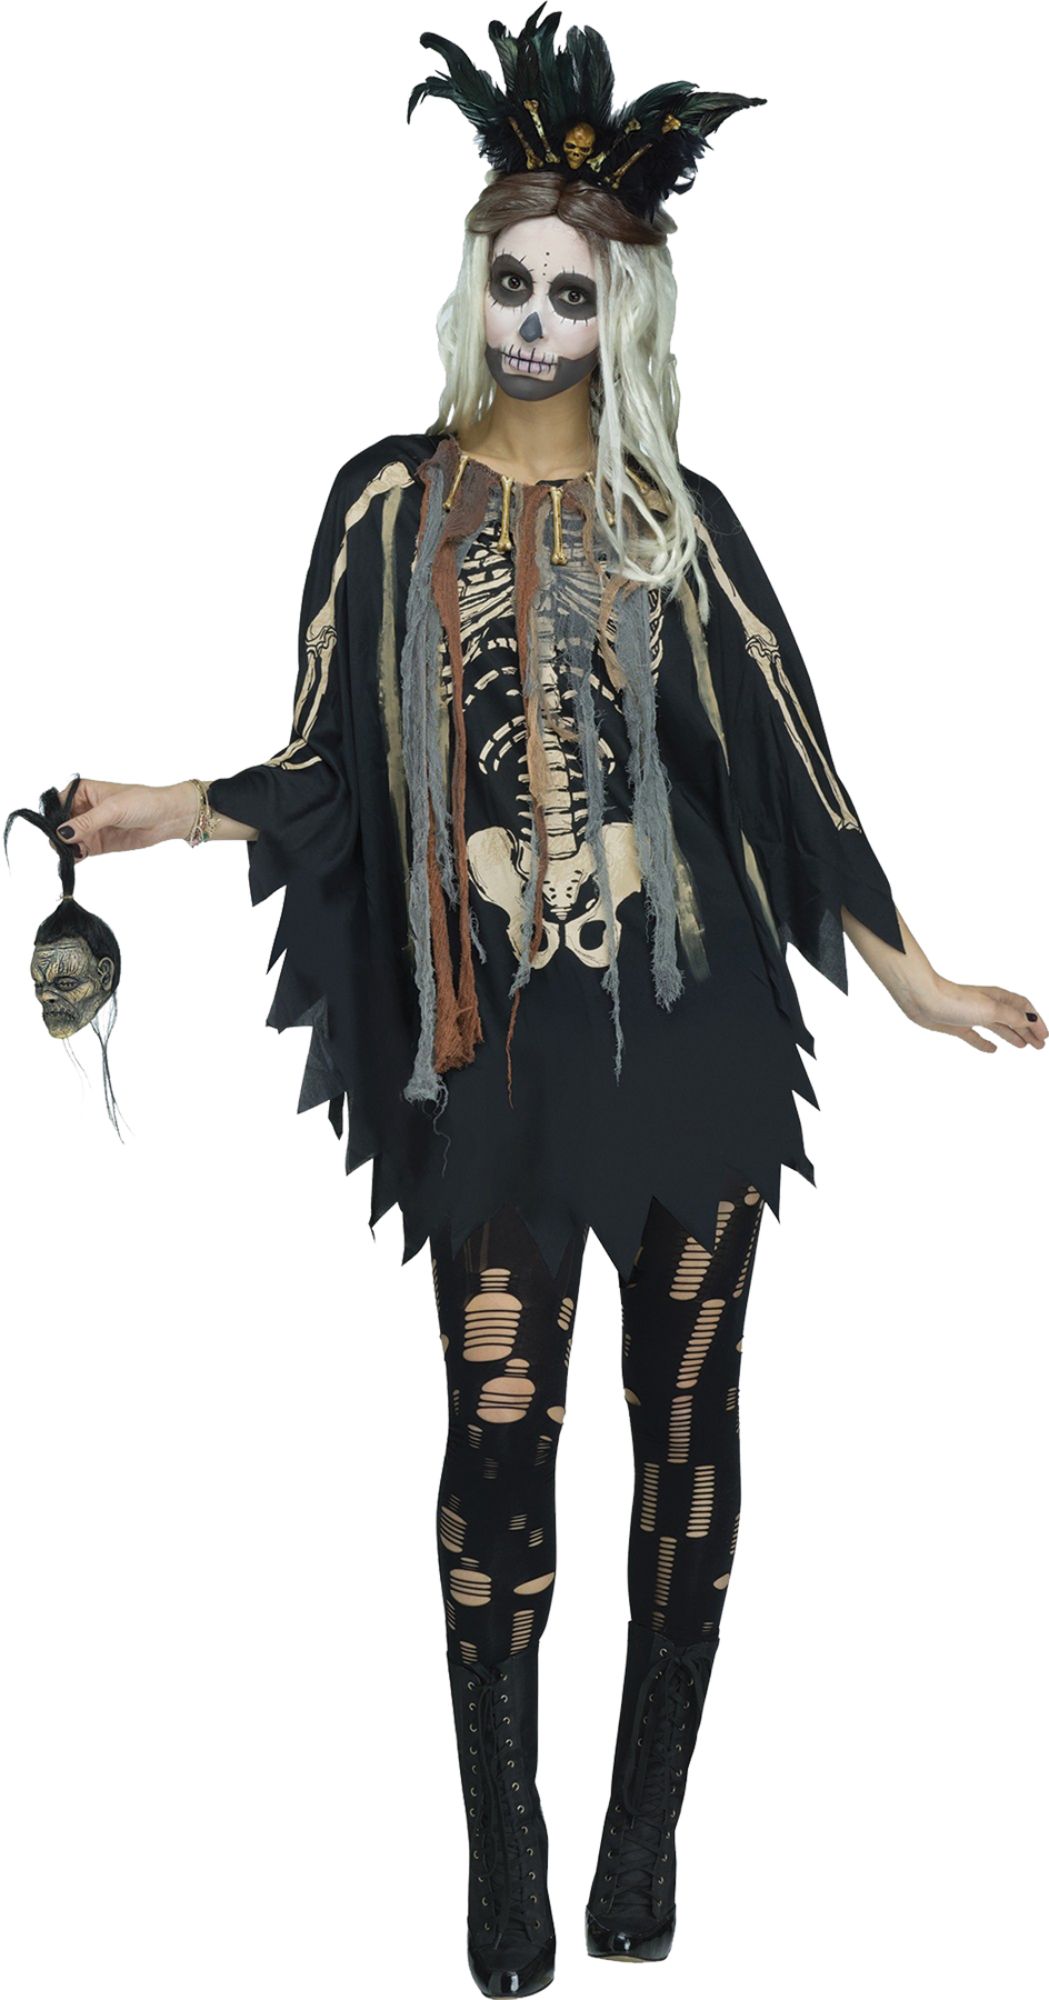 The Costume Center Black Voodoo Poncho Women Adult Halloween Costume - One Size